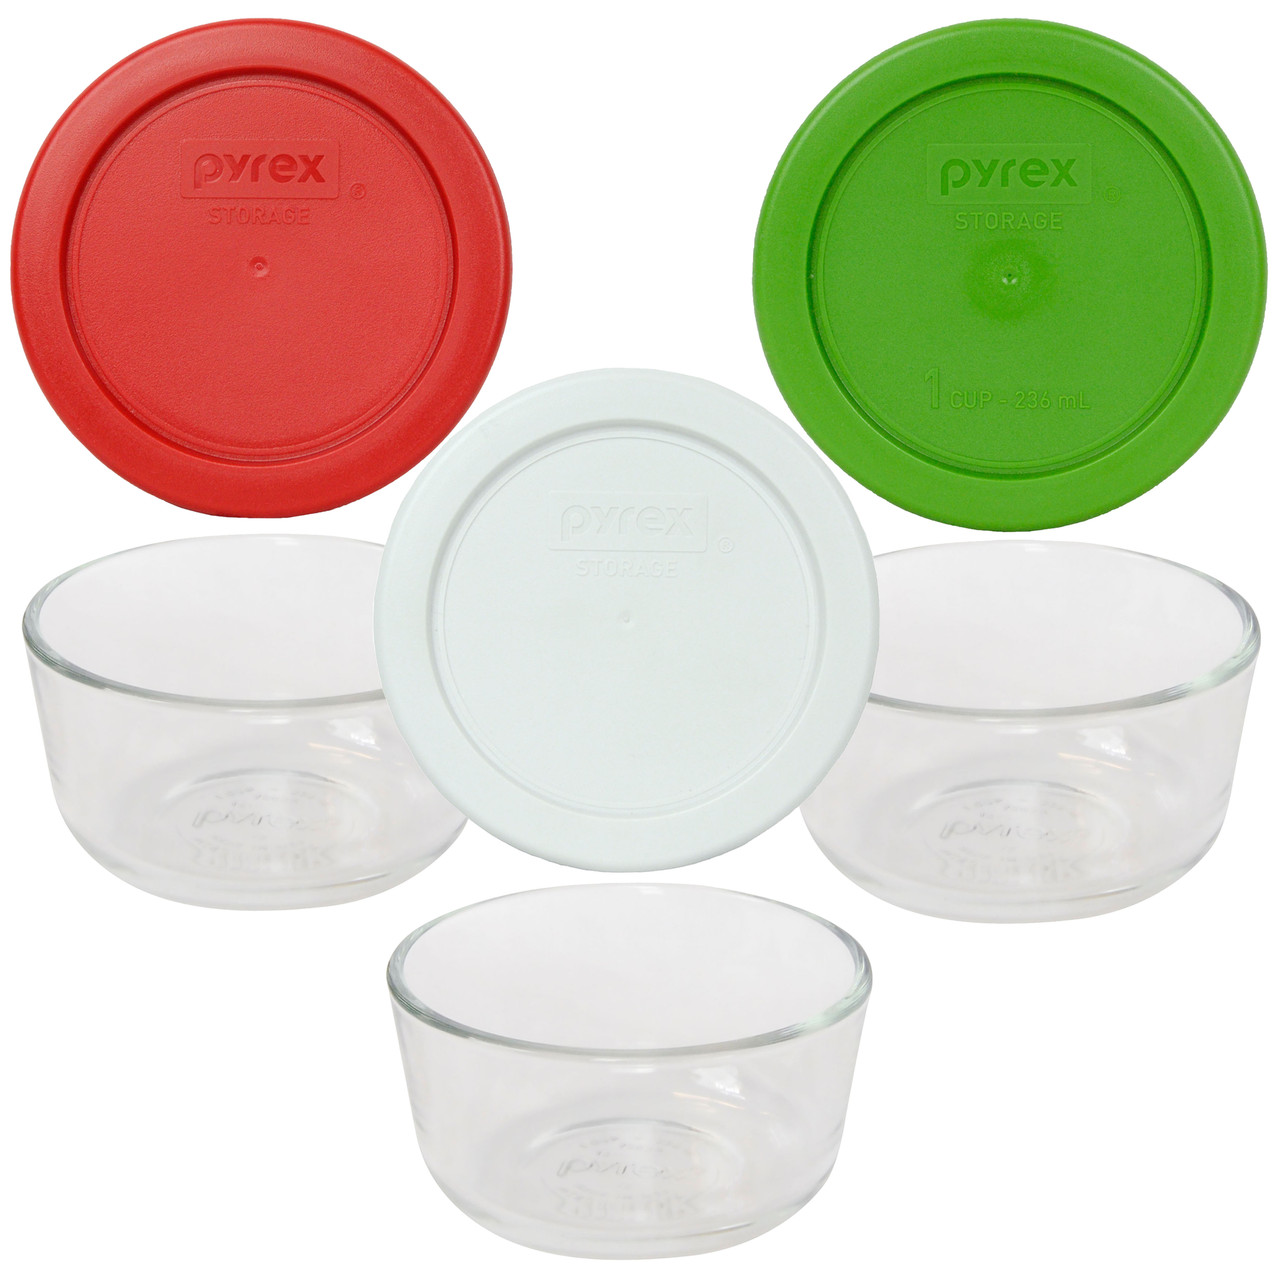 Pyrex (4) 7201 4-Cup Glass Storage Bowls and (4) 7201-PC Poppy Red Plastic Lids, Clear